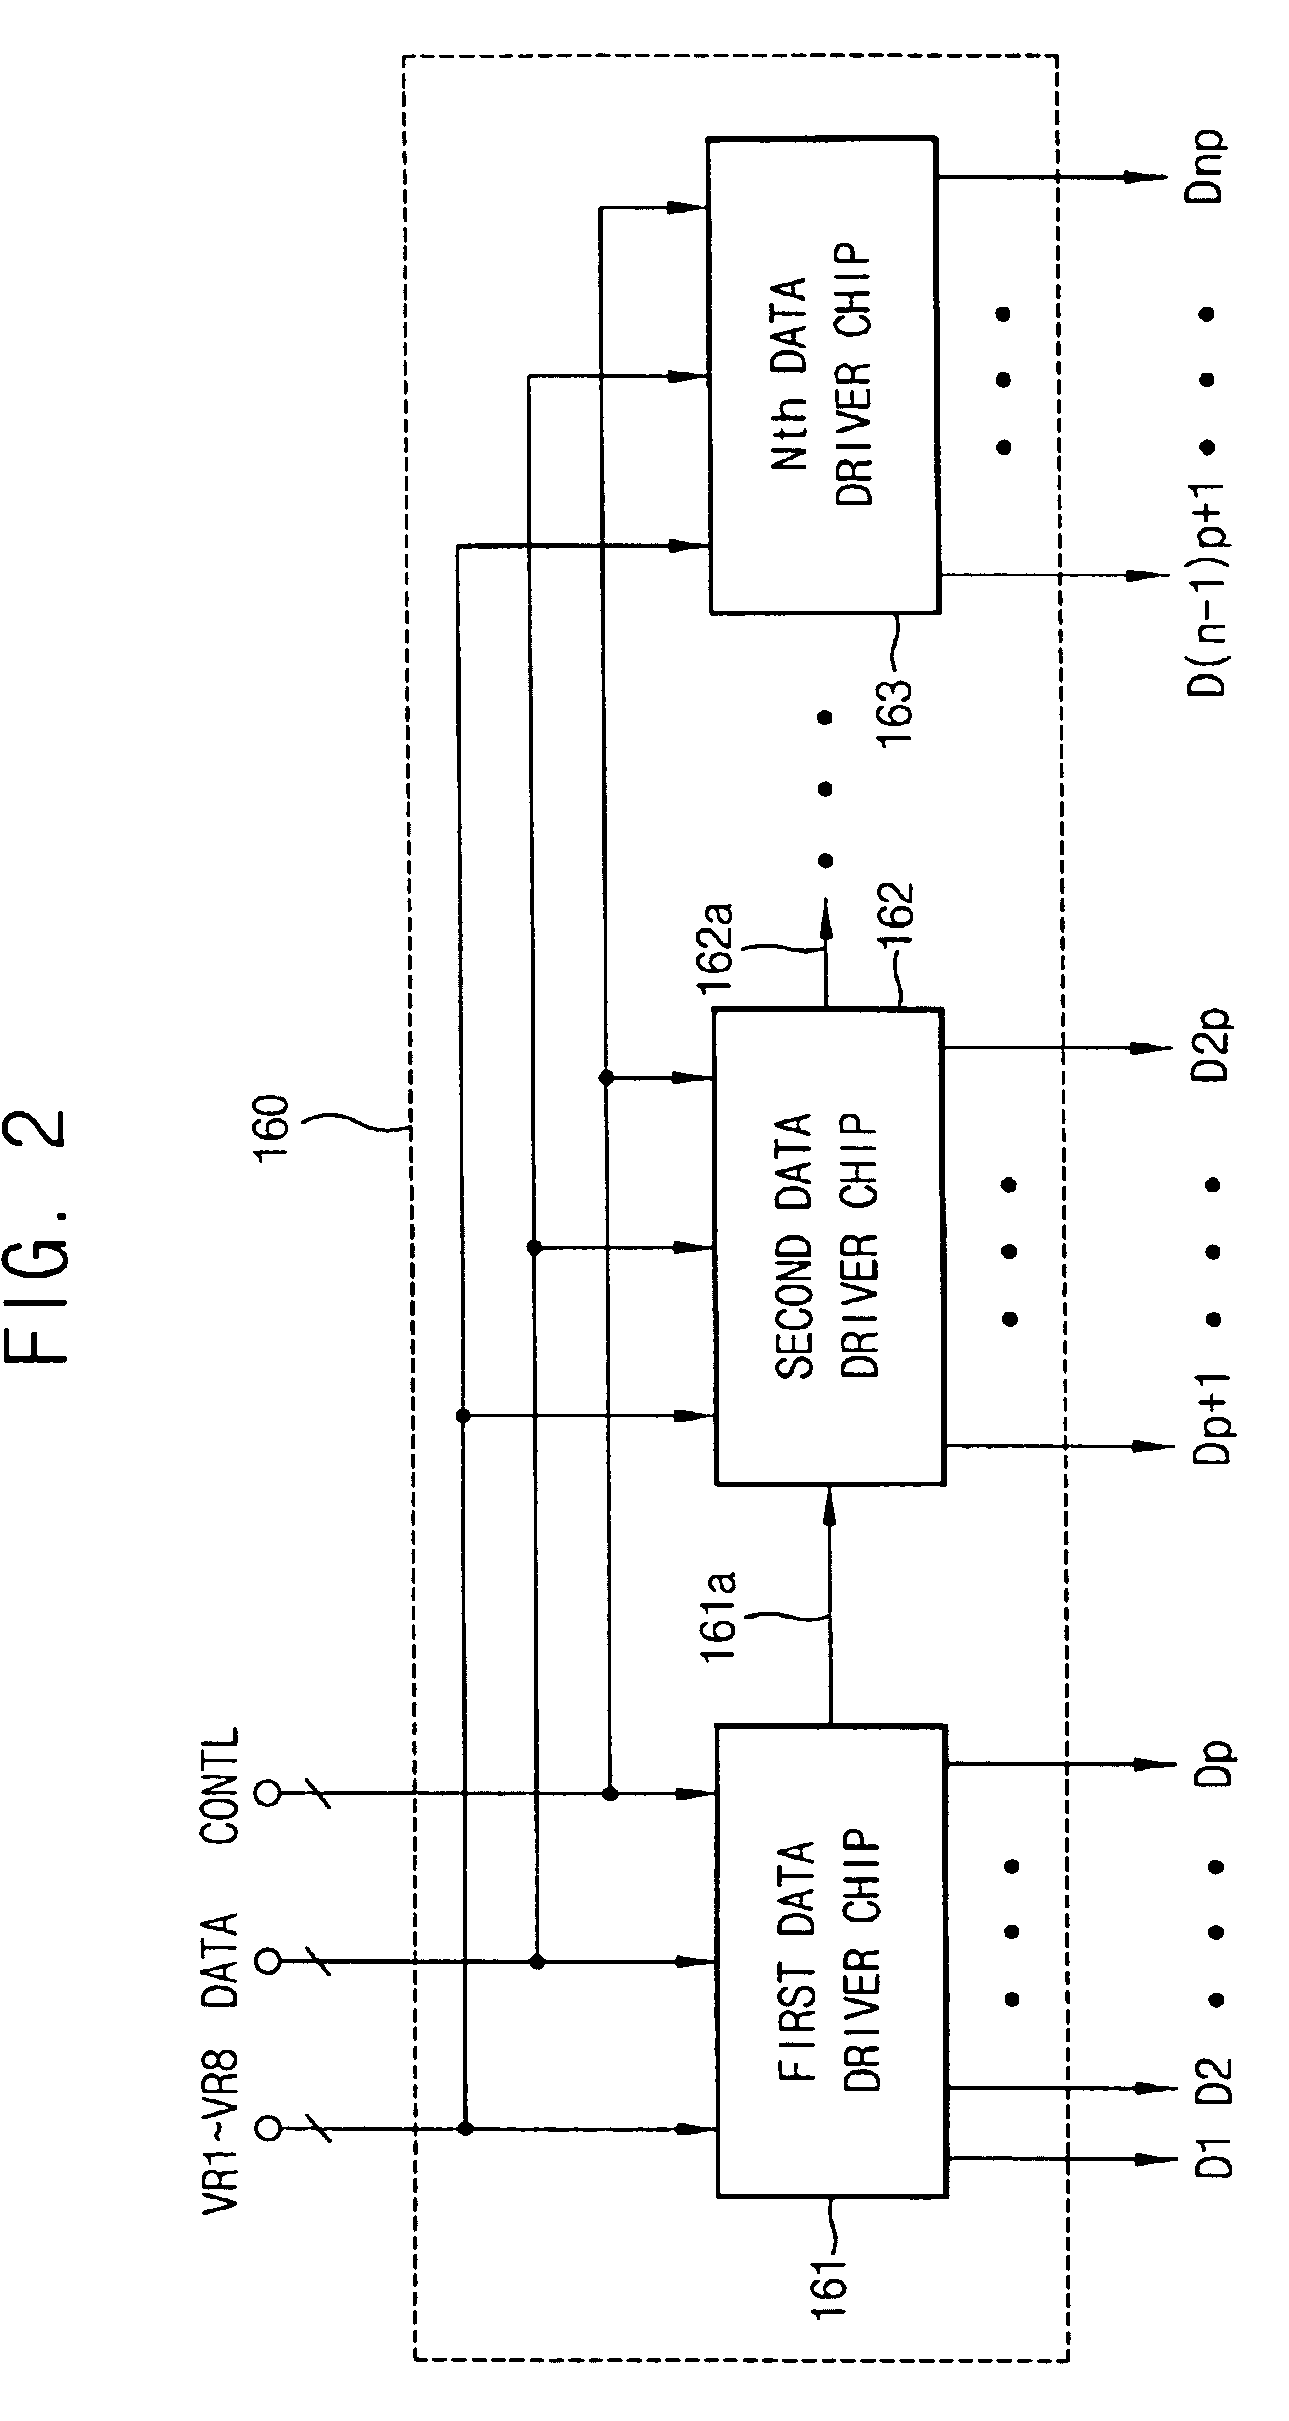 Display device, apparatus for driving the same and method of driving the same